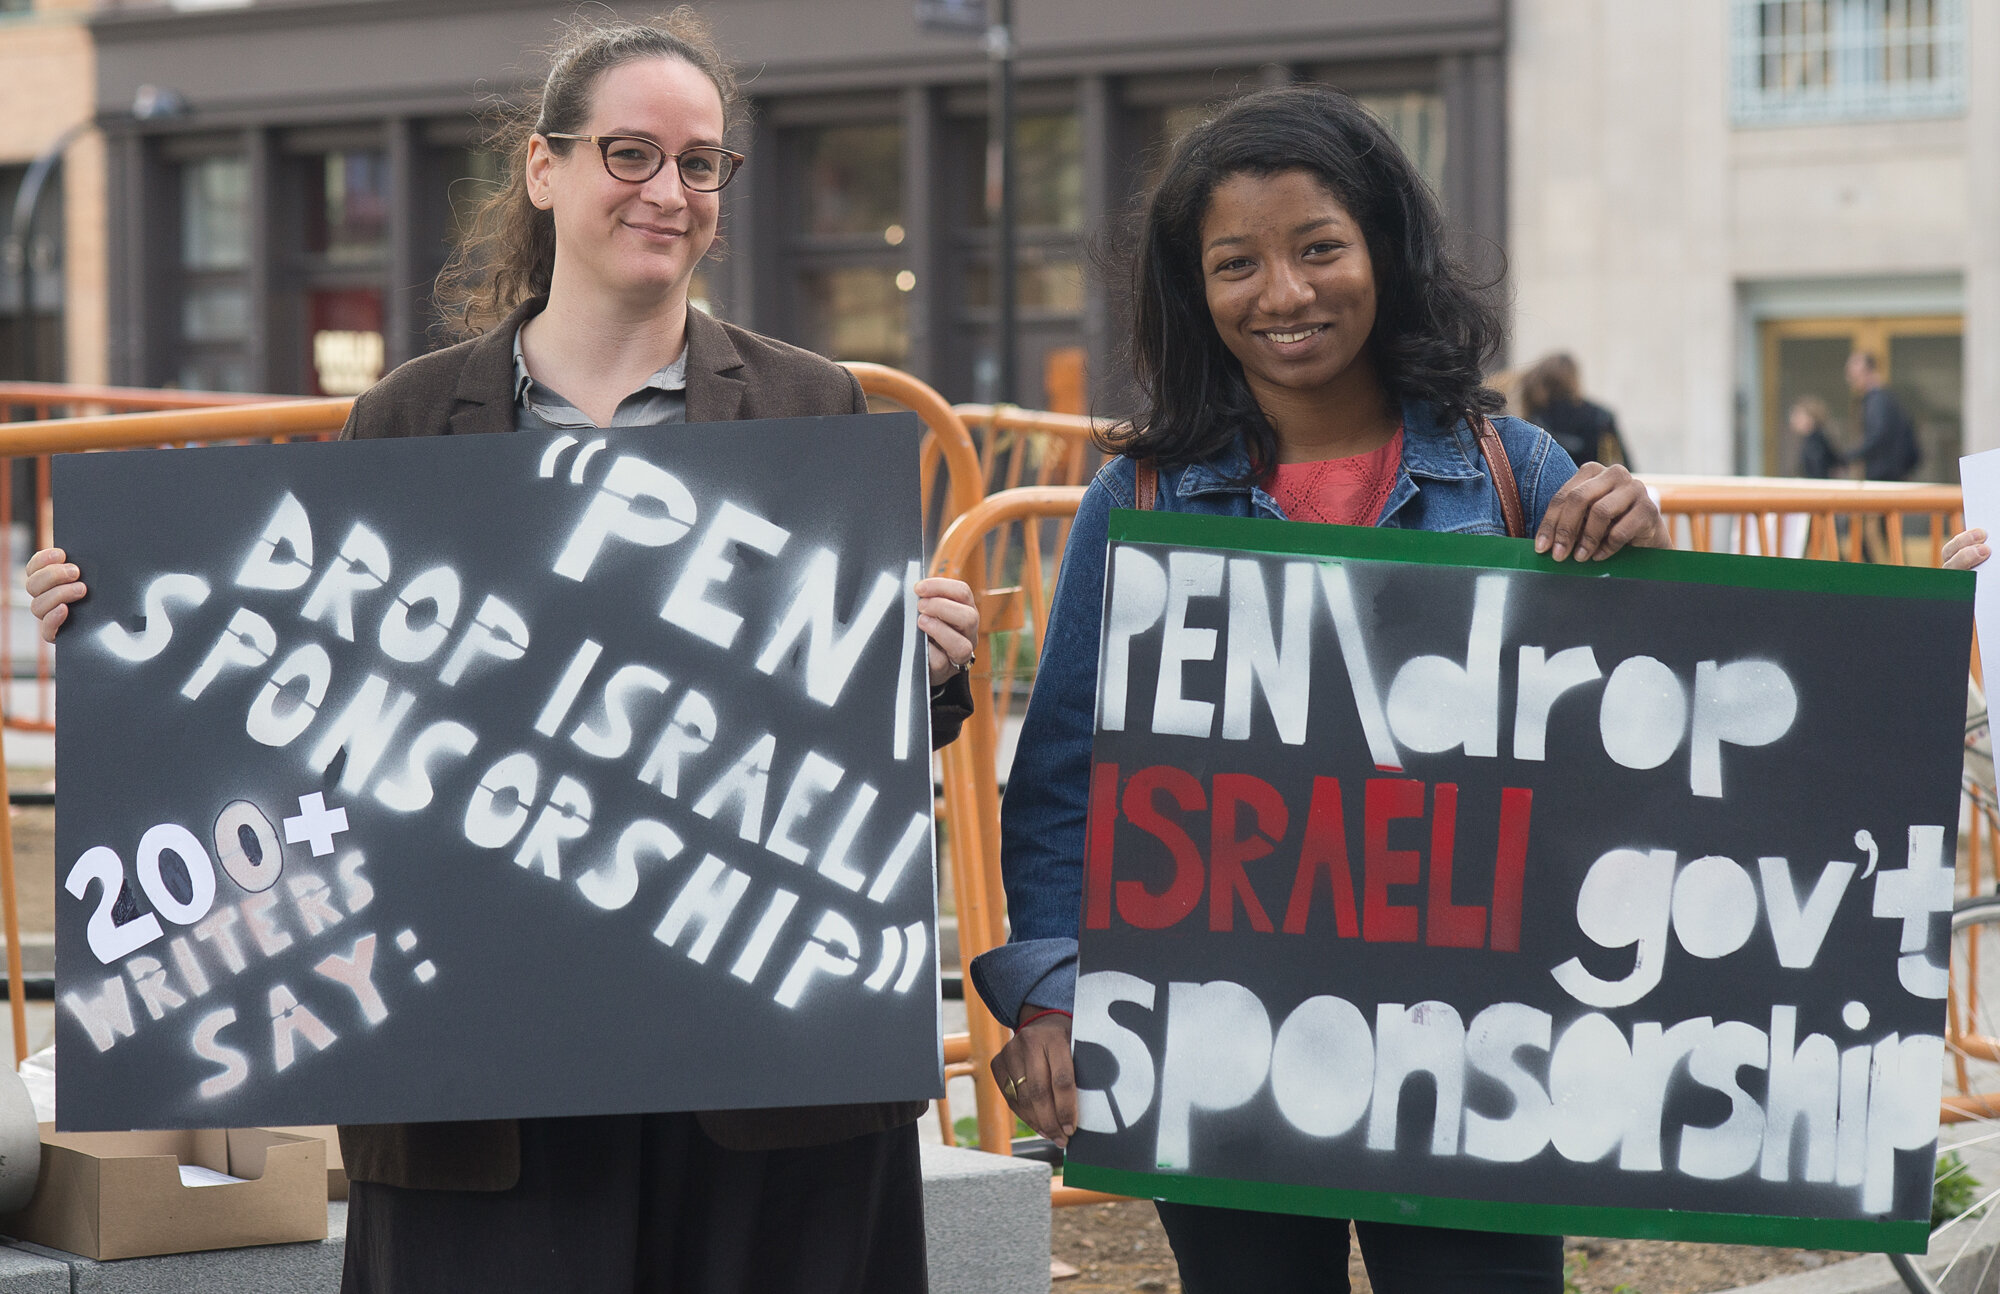  Two protesters smile and hold signs: “PEN: 200+ writers say, Drop Israeli government sponsorship” 